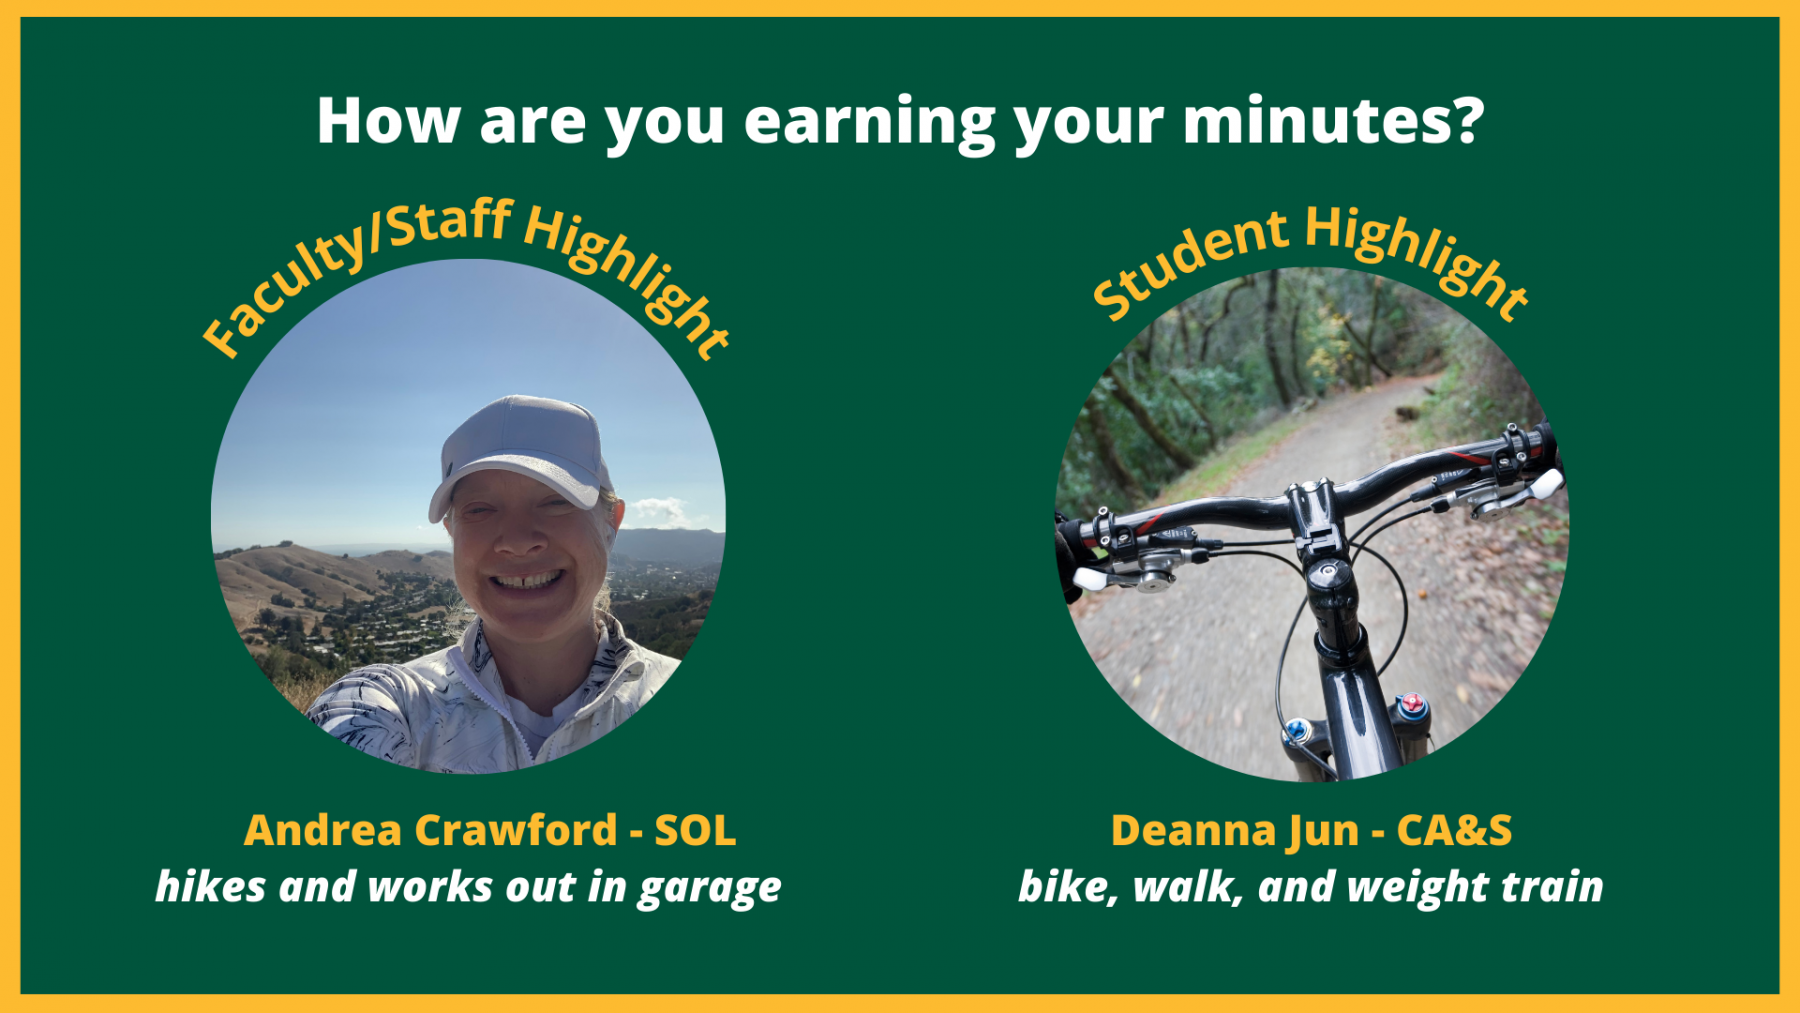 Faculty/staff and student highlights and how they are earning their minutes this month